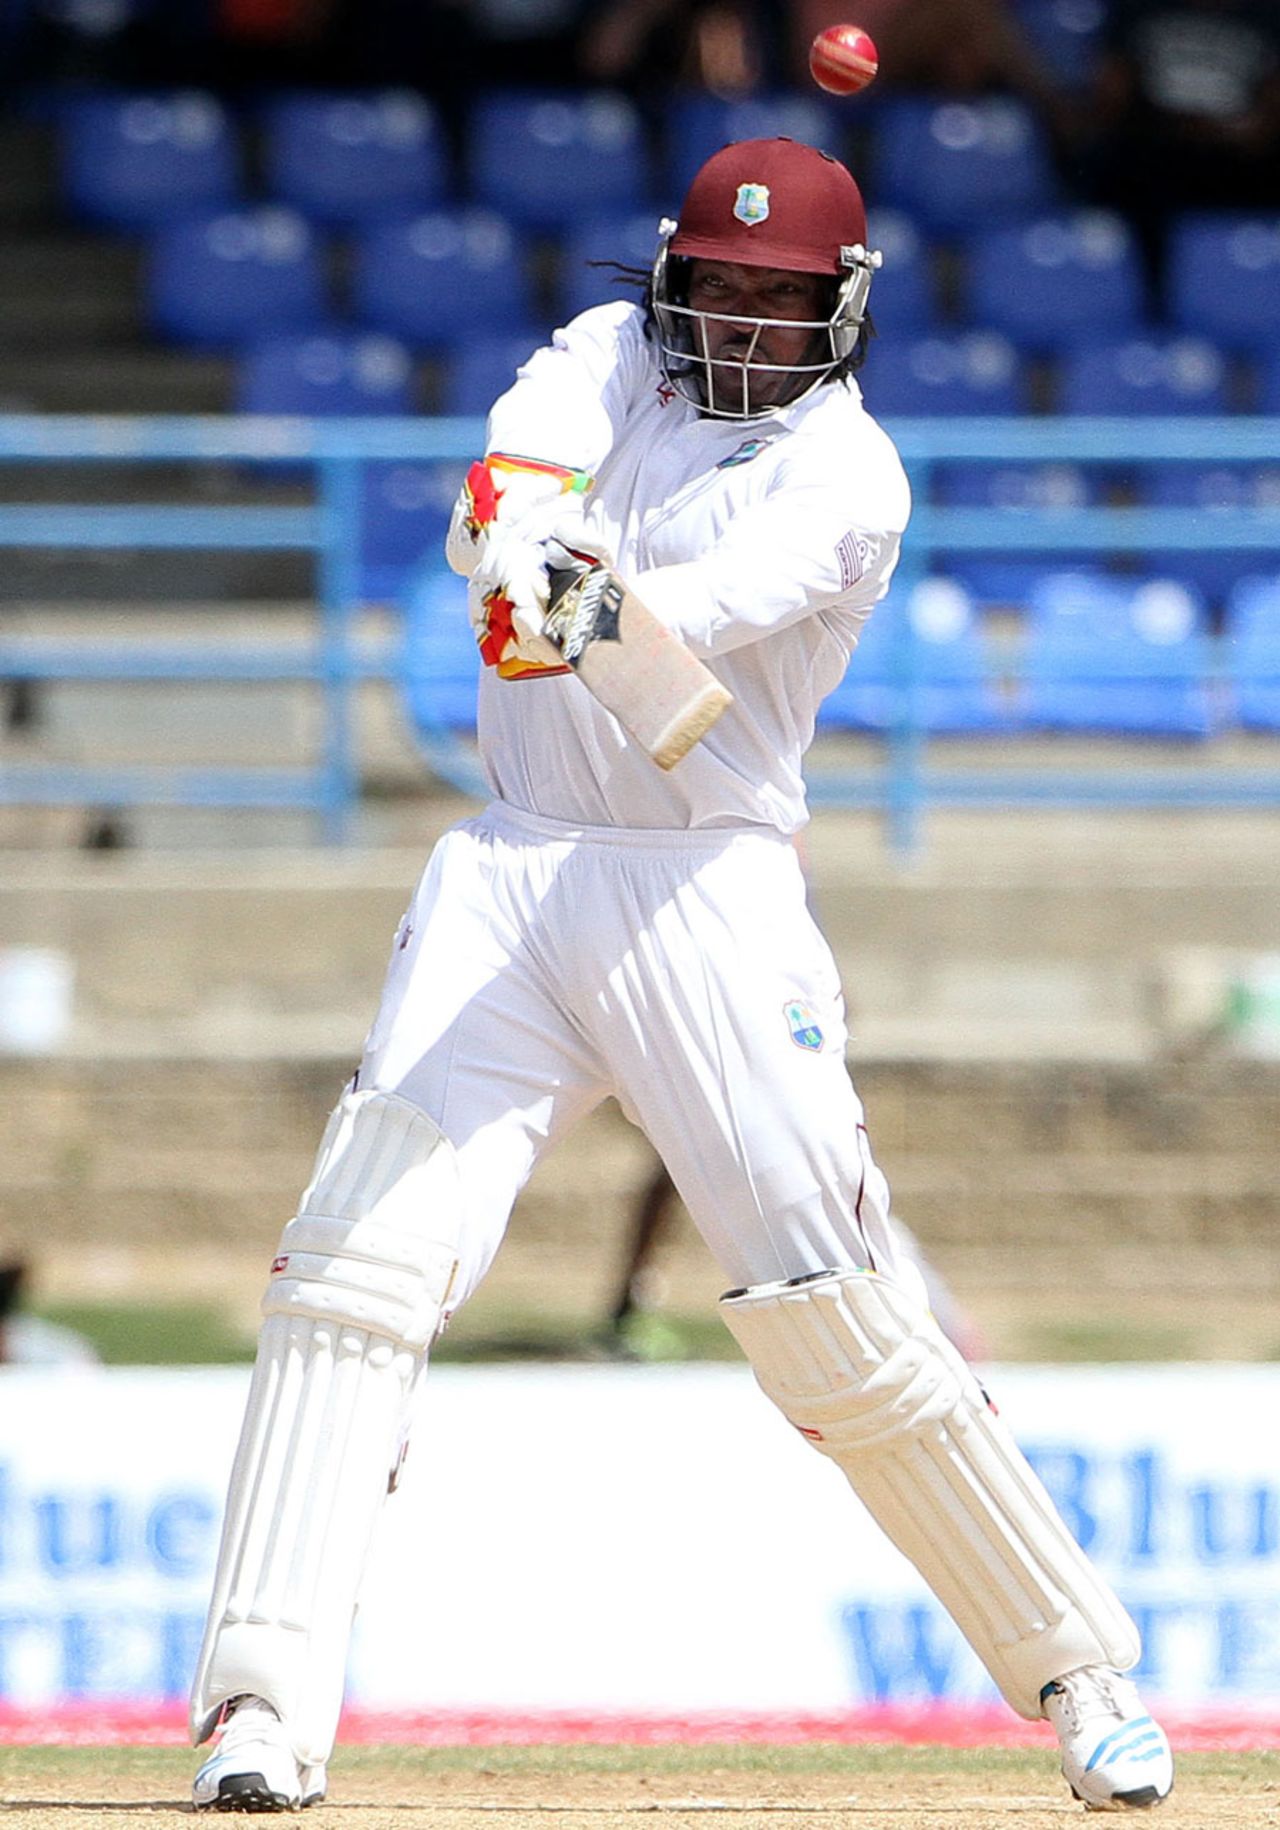 Chris Gayle cuts, West Indies v New Zealand, 2nd Test, Port of Spain, 5th day, June 20, 2014